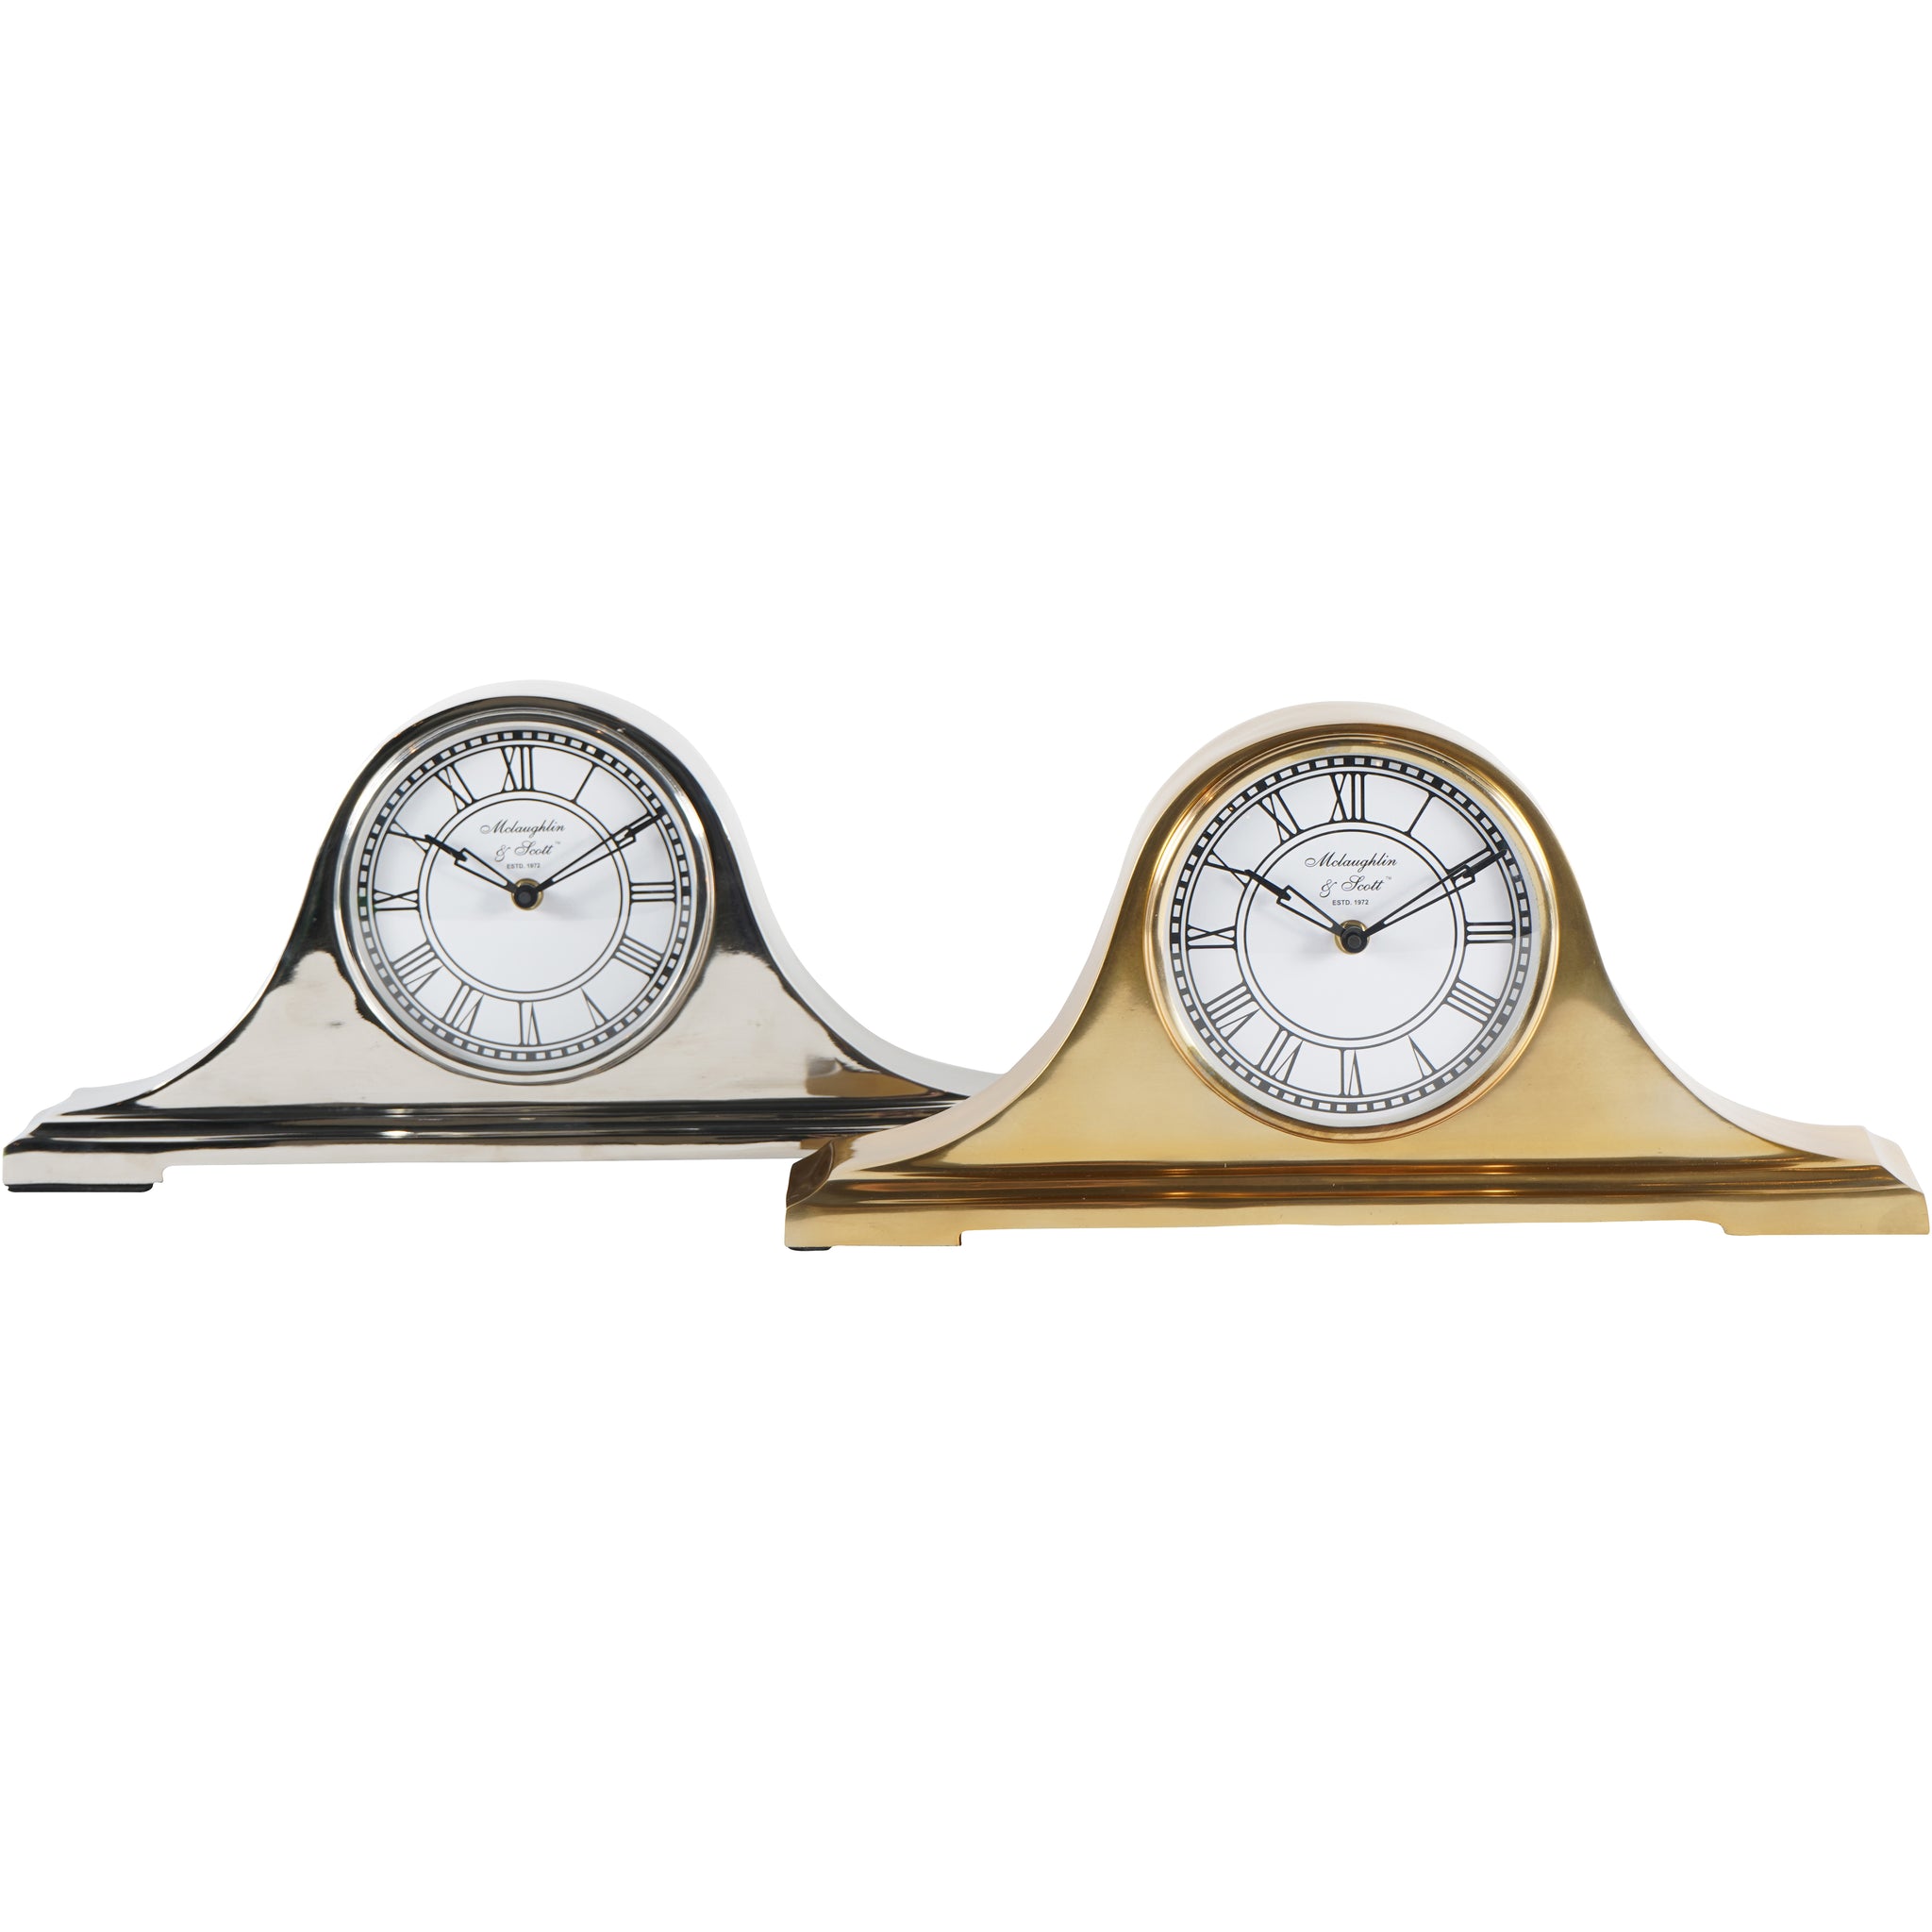 Period Style Carriage Mantel Clock in Nickel Finish